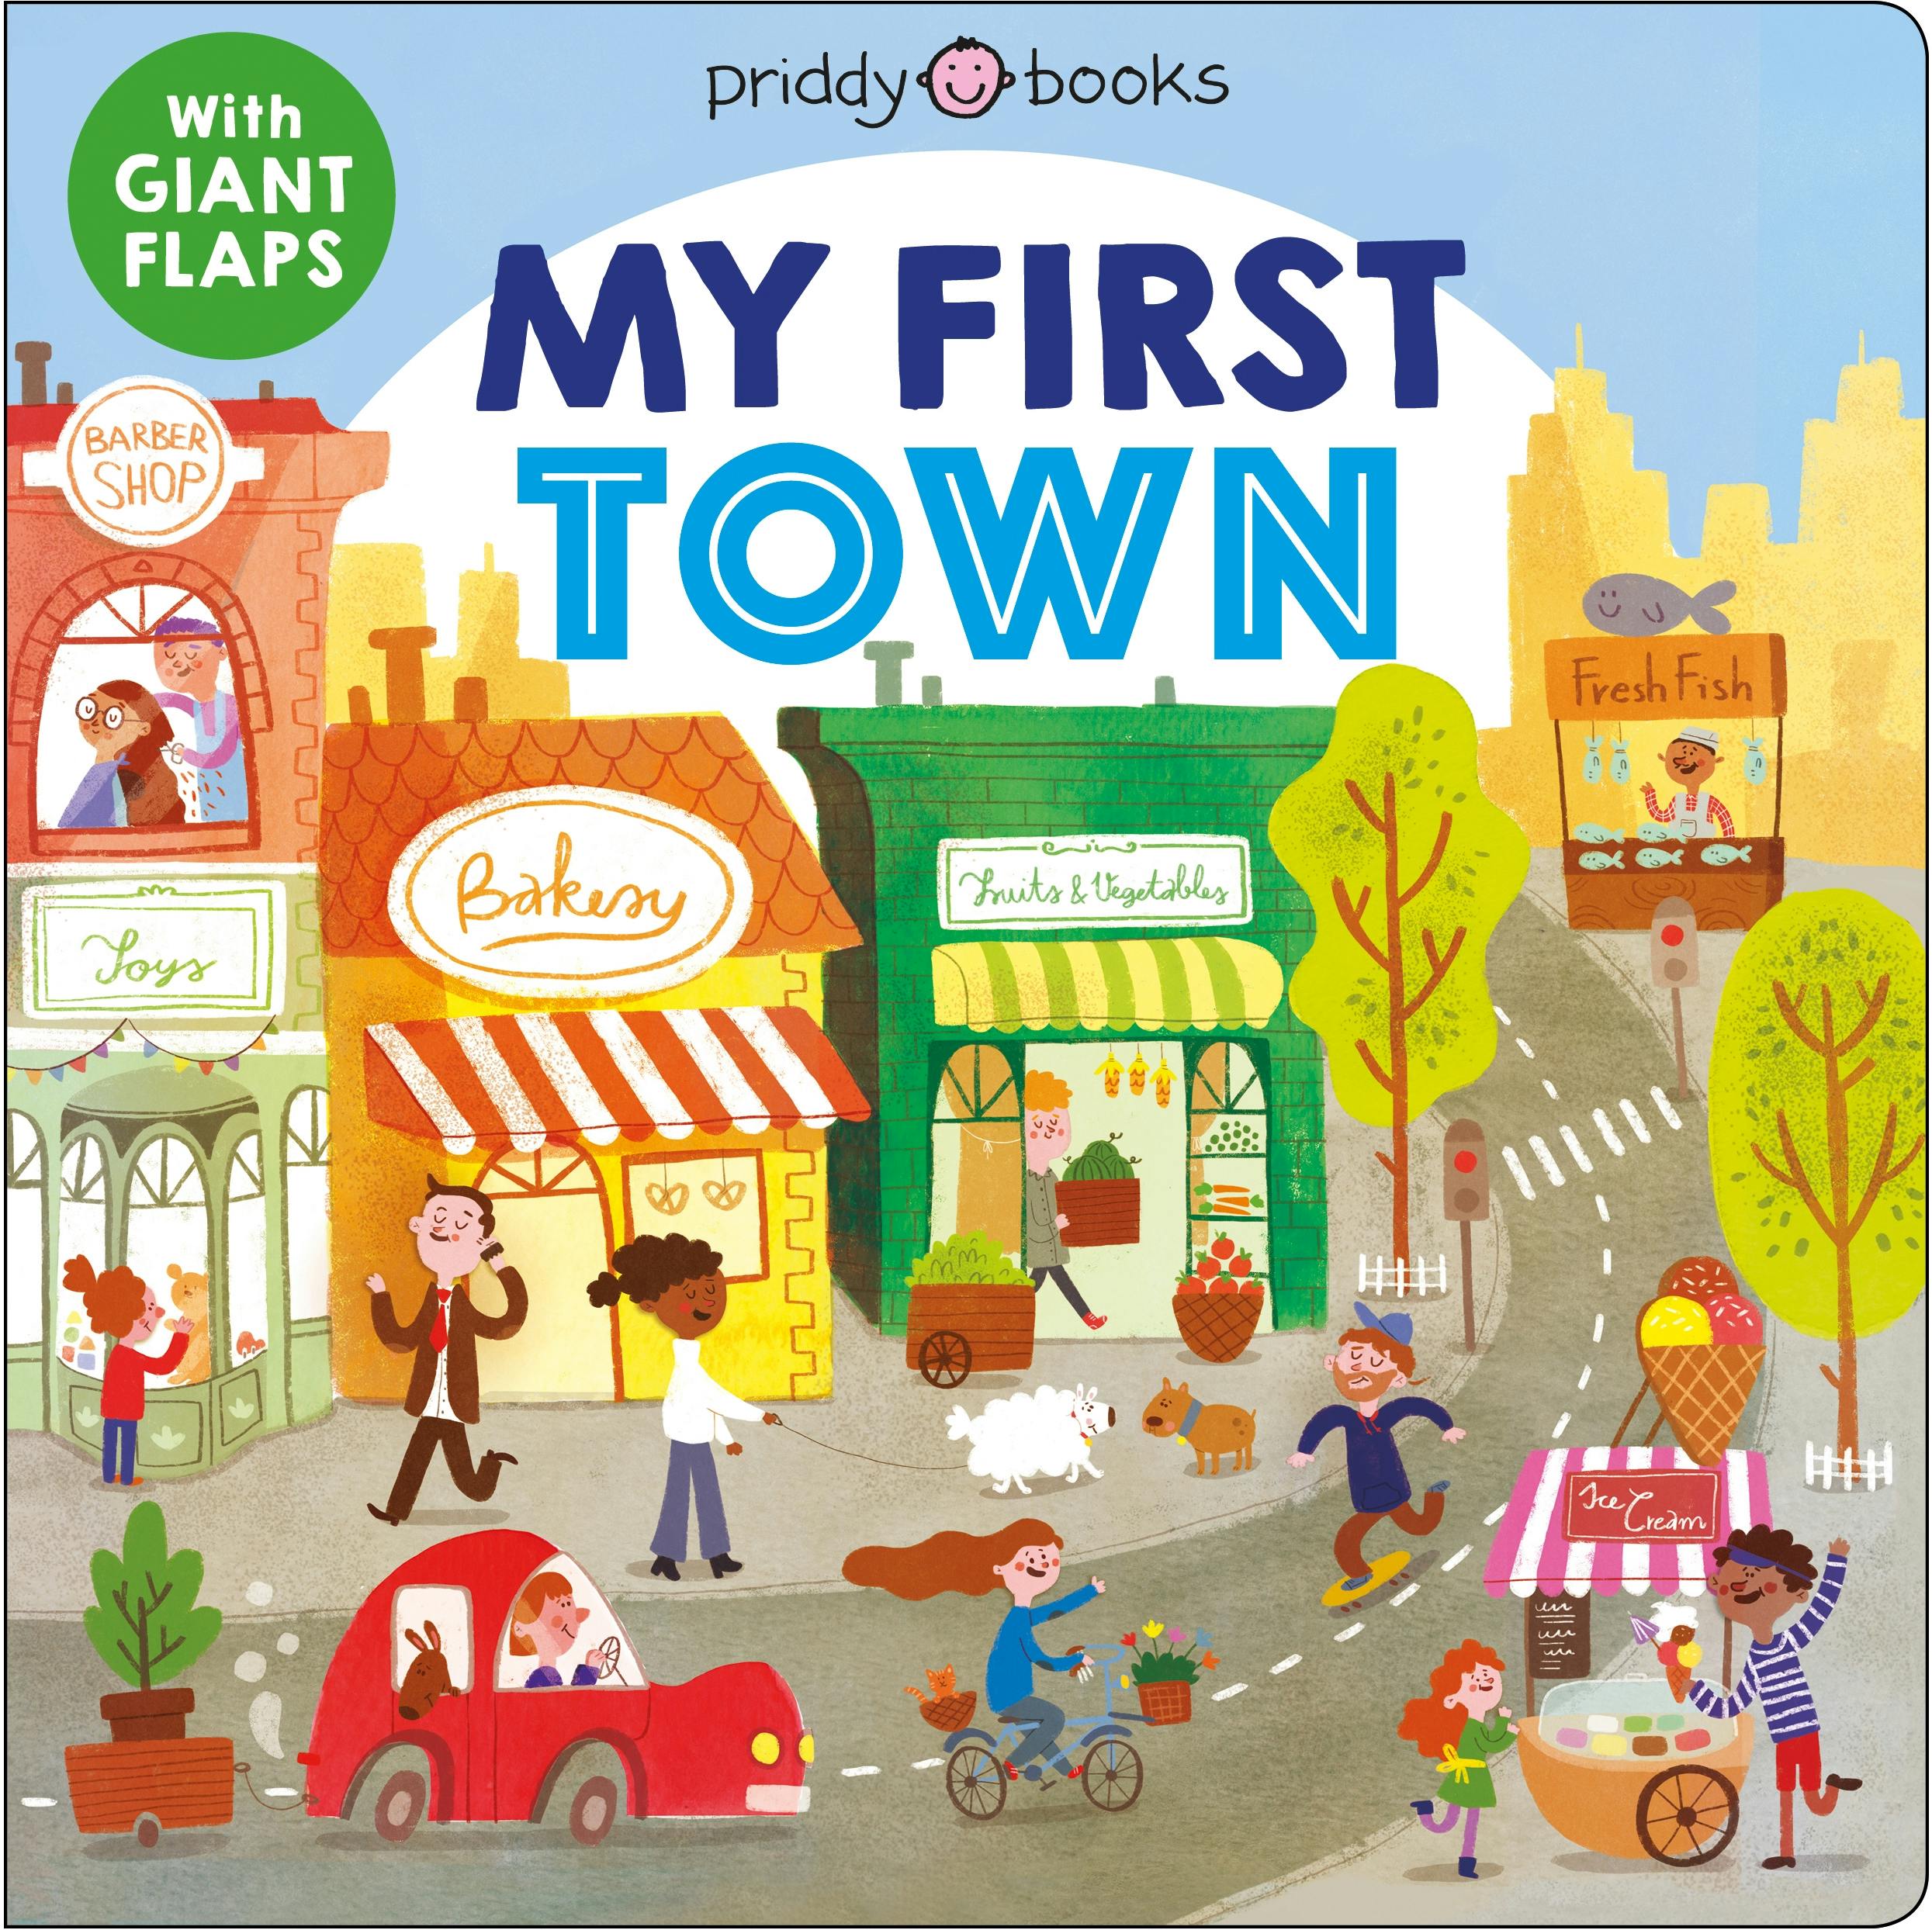 My first book. Priddy Roger "my first Farm". My first book about. Places in Town. Town цена